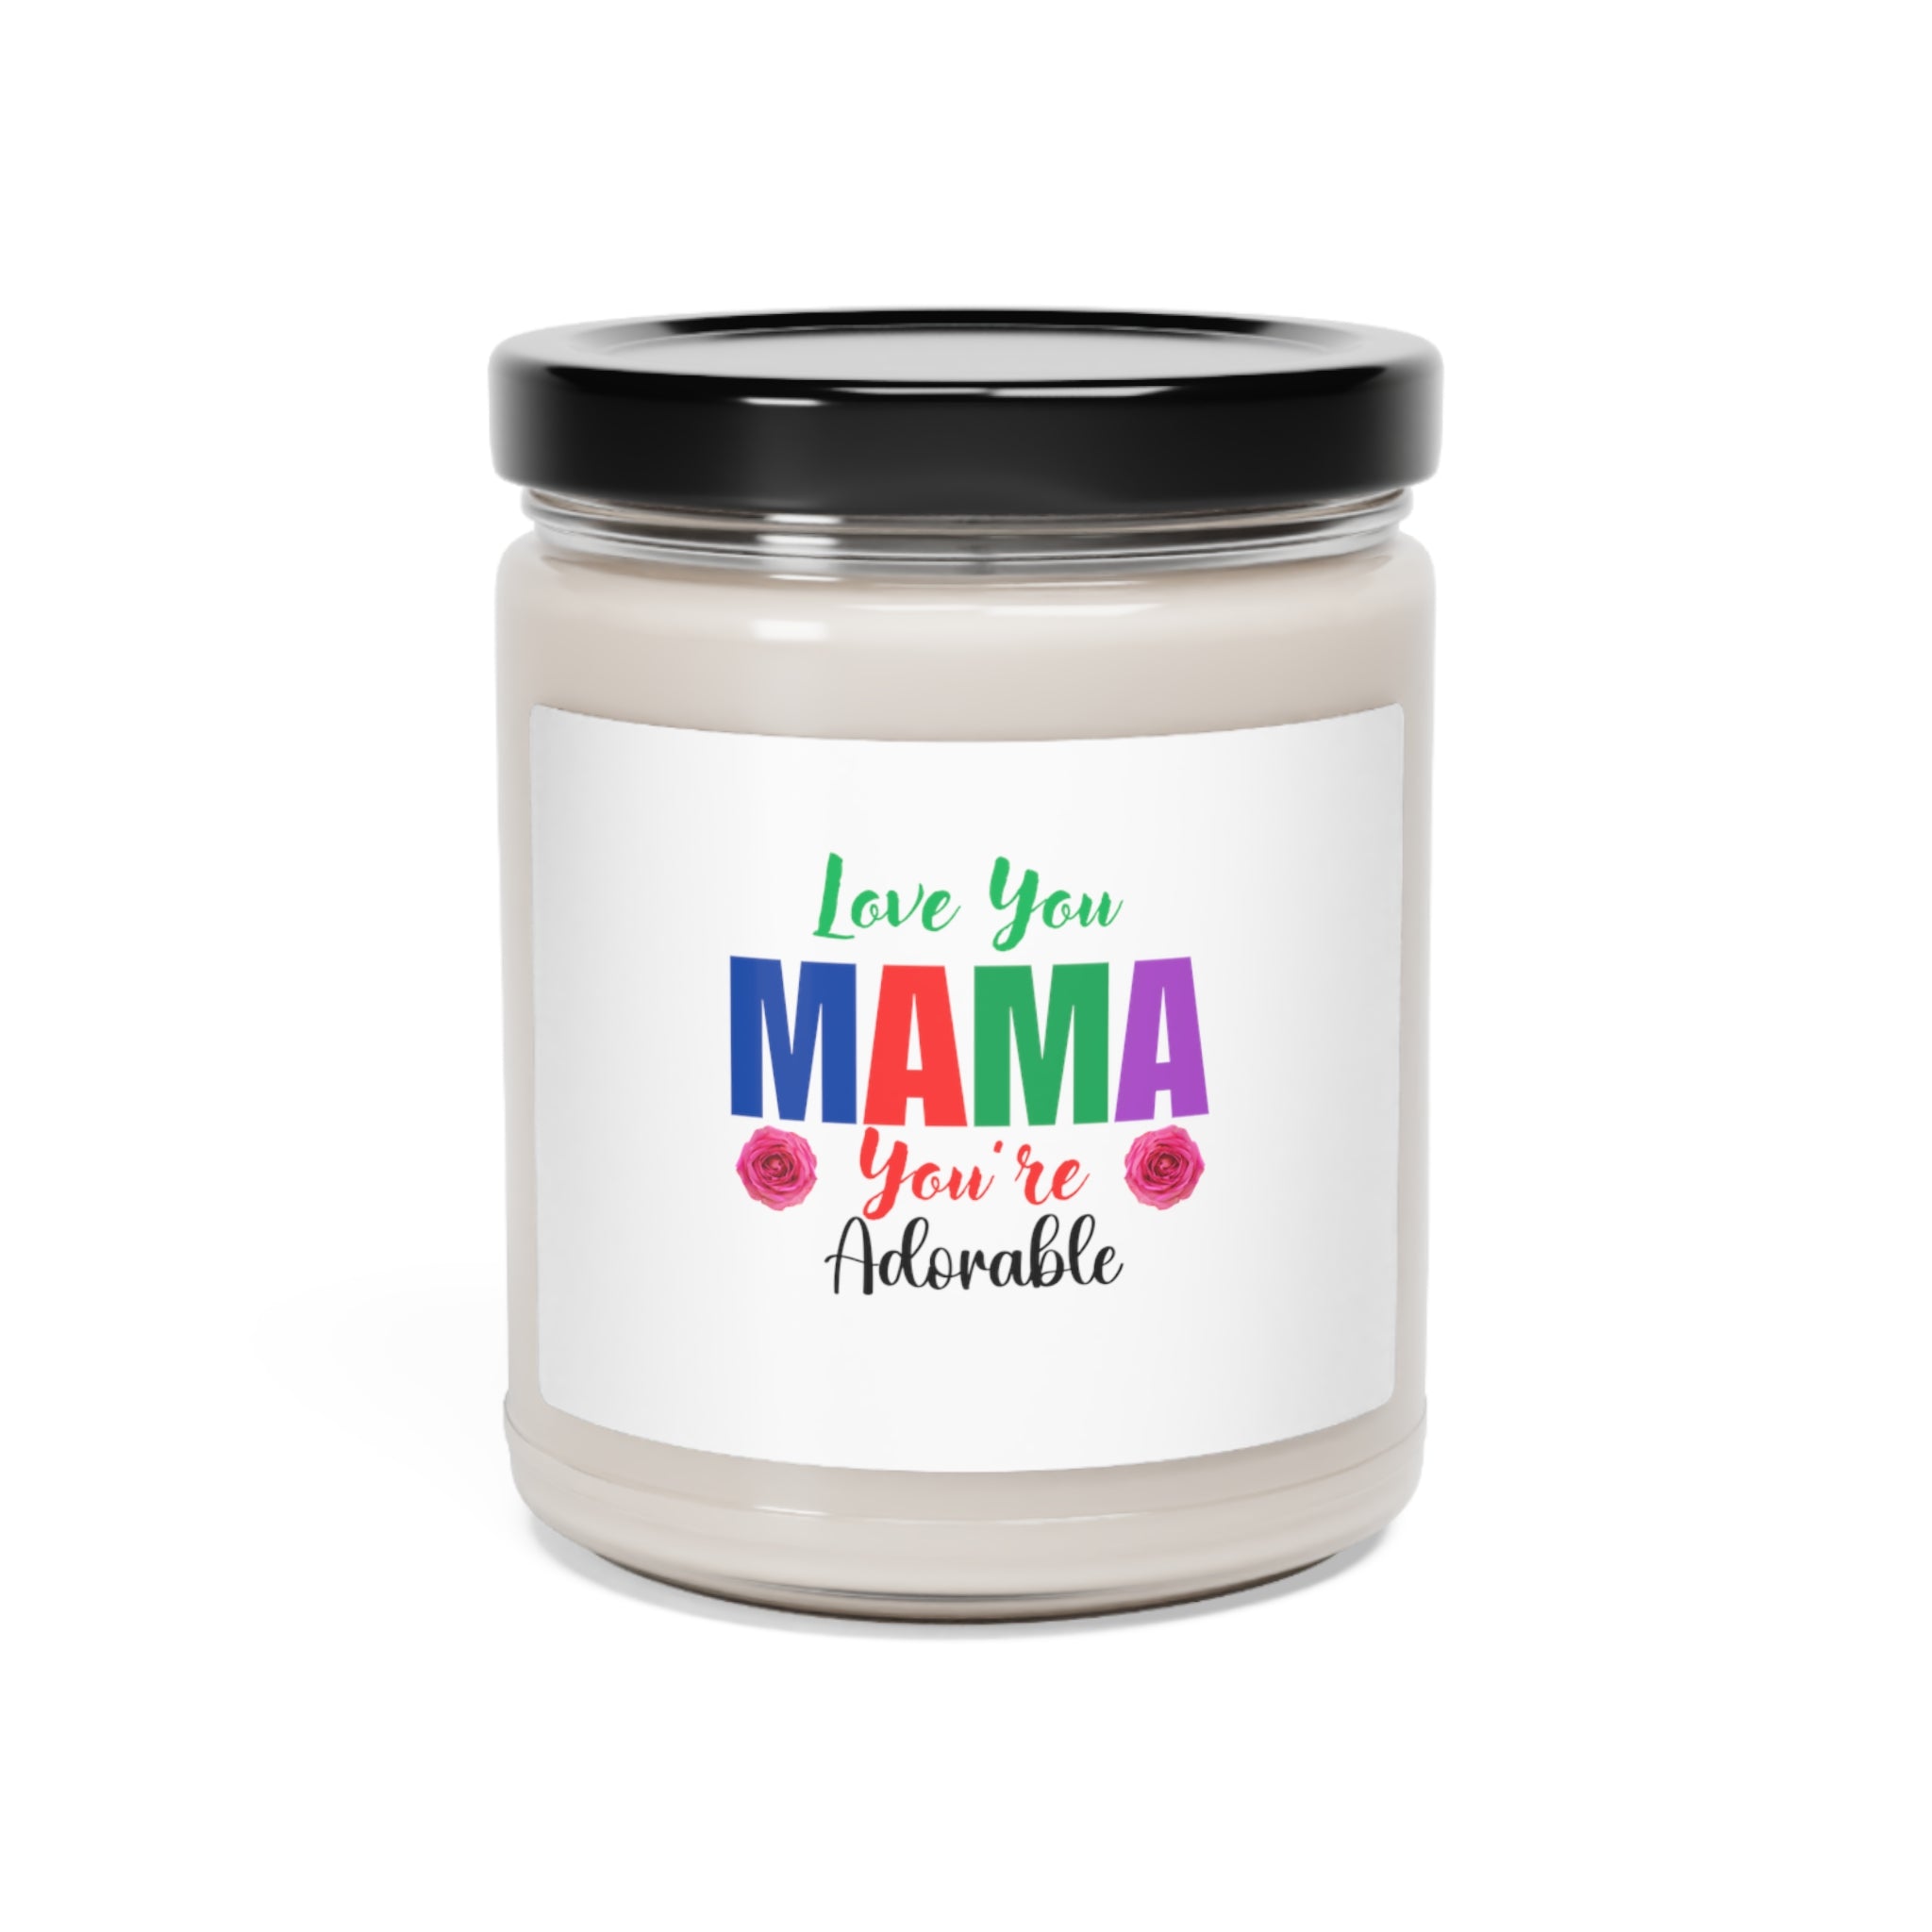 Love You Mama You are Adorable Scented Soy Candle, 9 oz Jar, nine different Scents